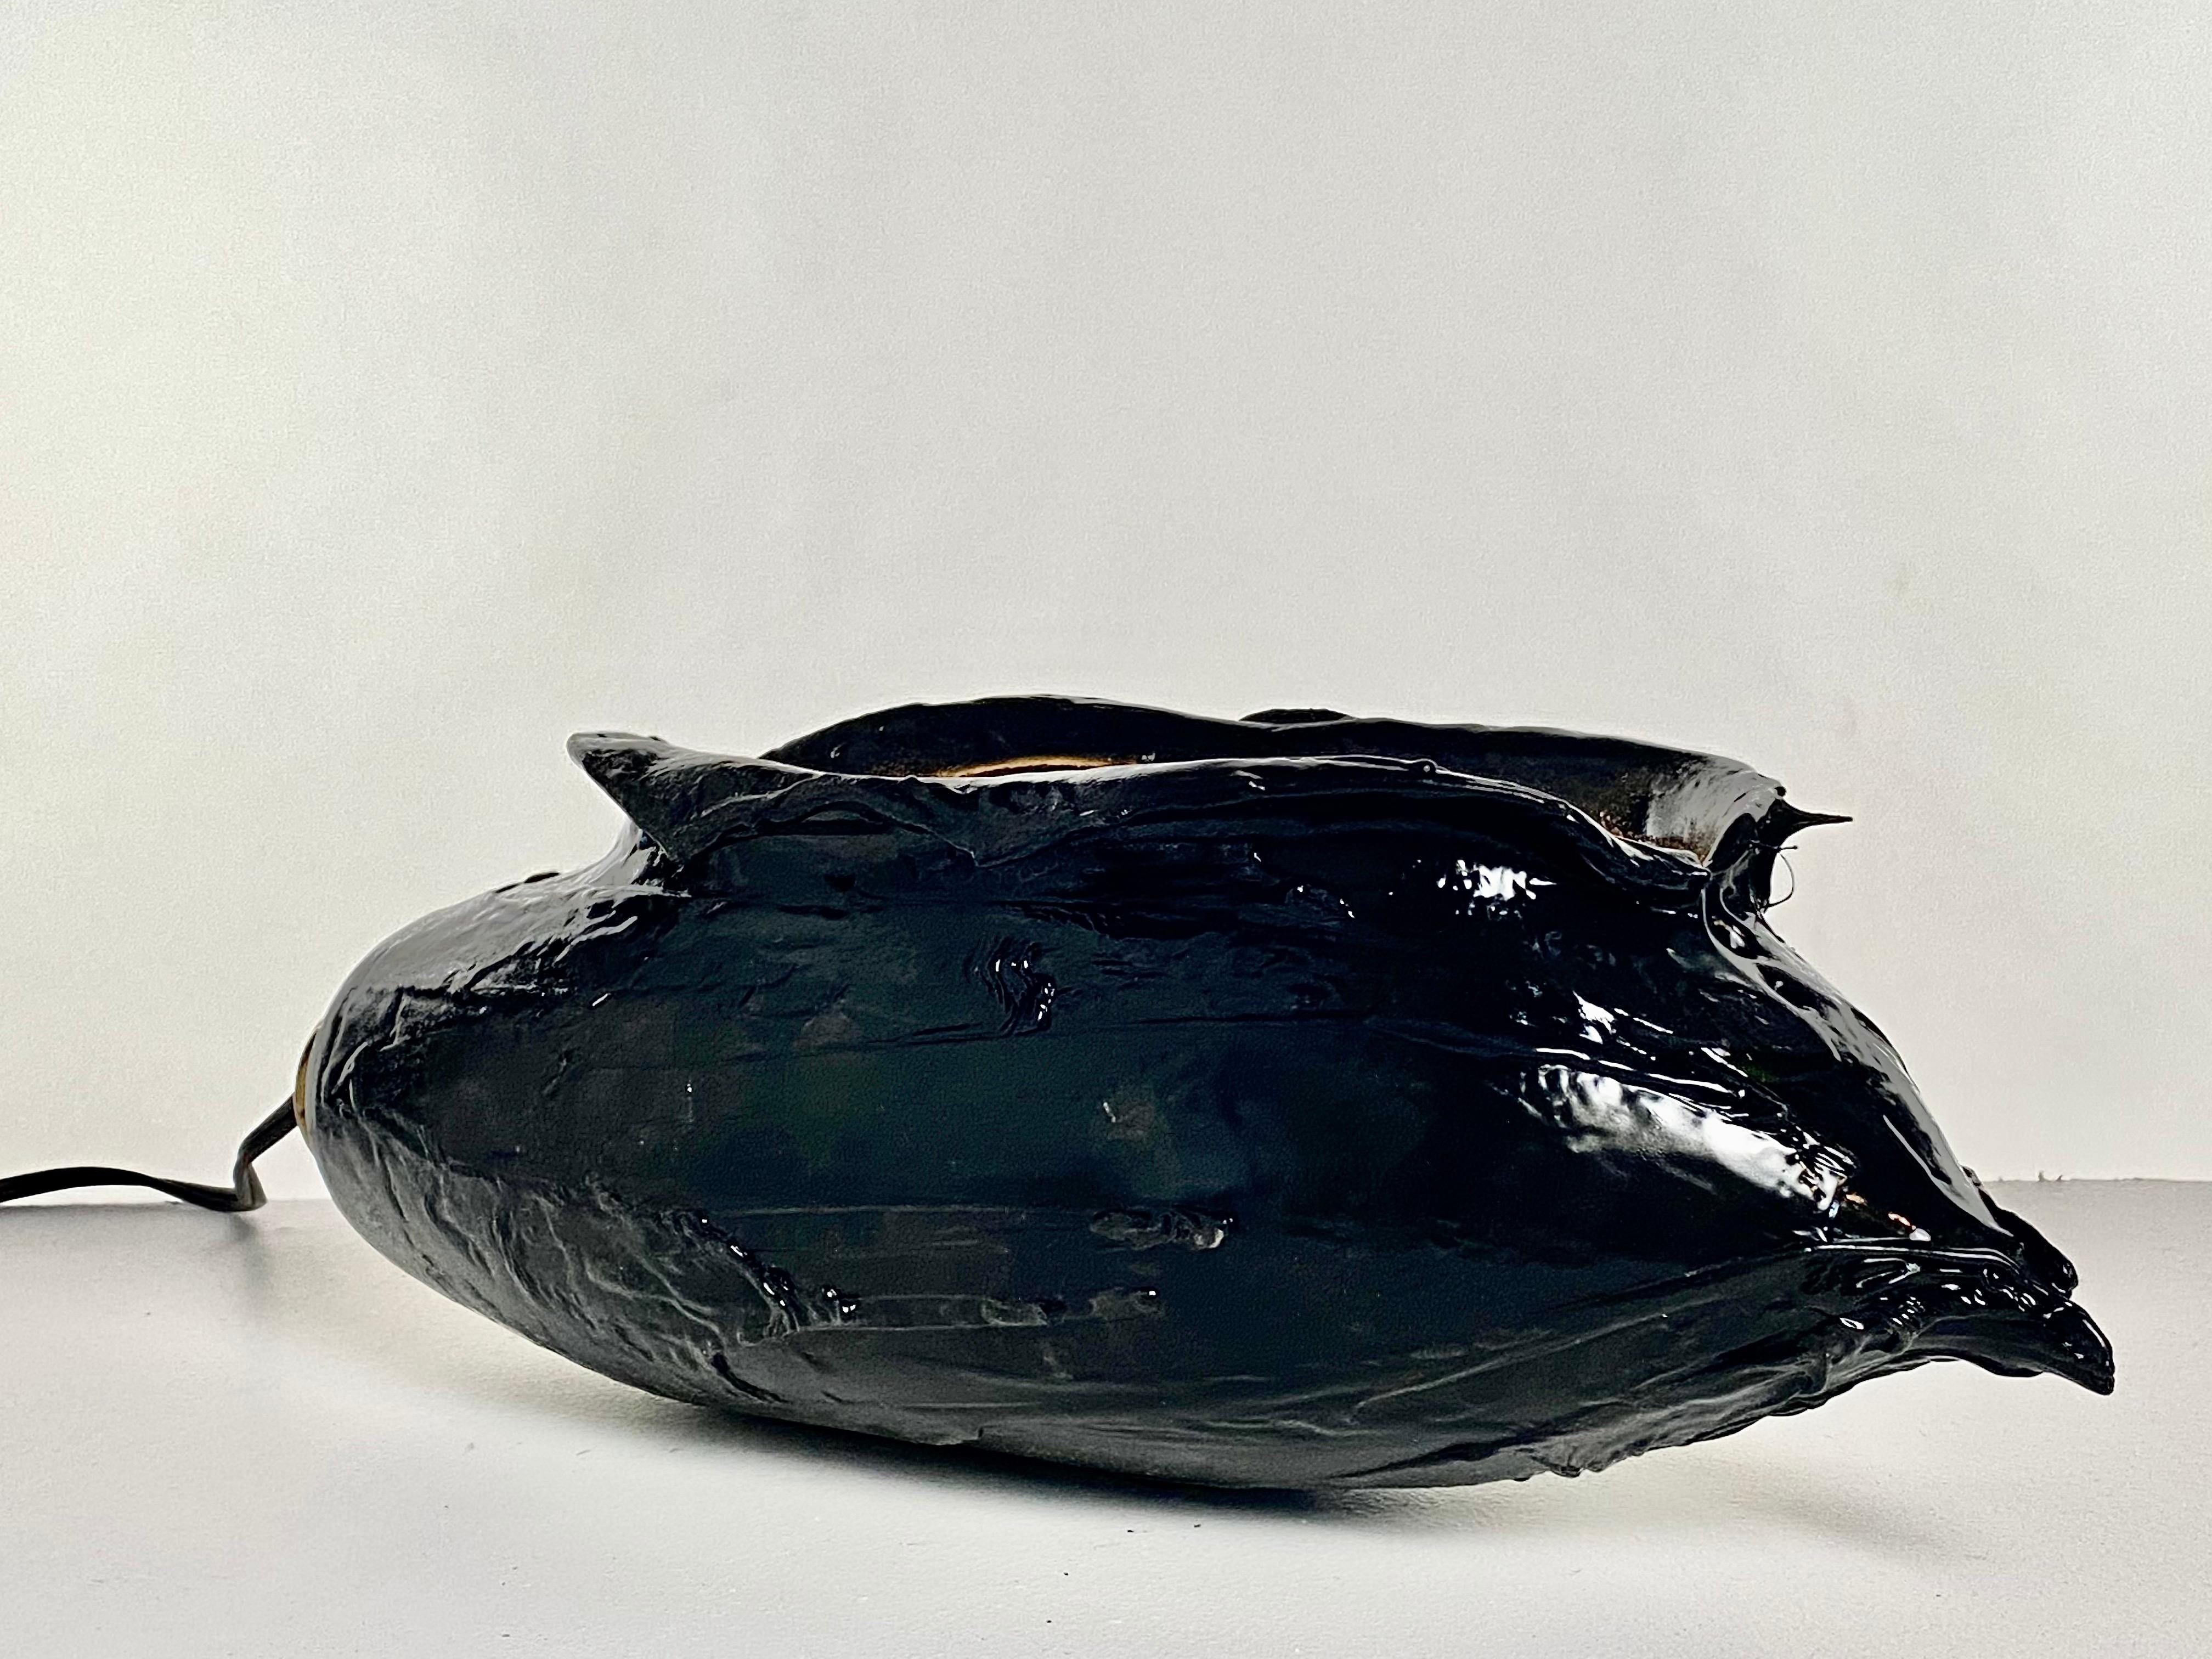 Blown Glass Black Rubber Pendent or Table Light, 21st Century by Mattia Biagi In New Condition For Sale In Culver City, CA